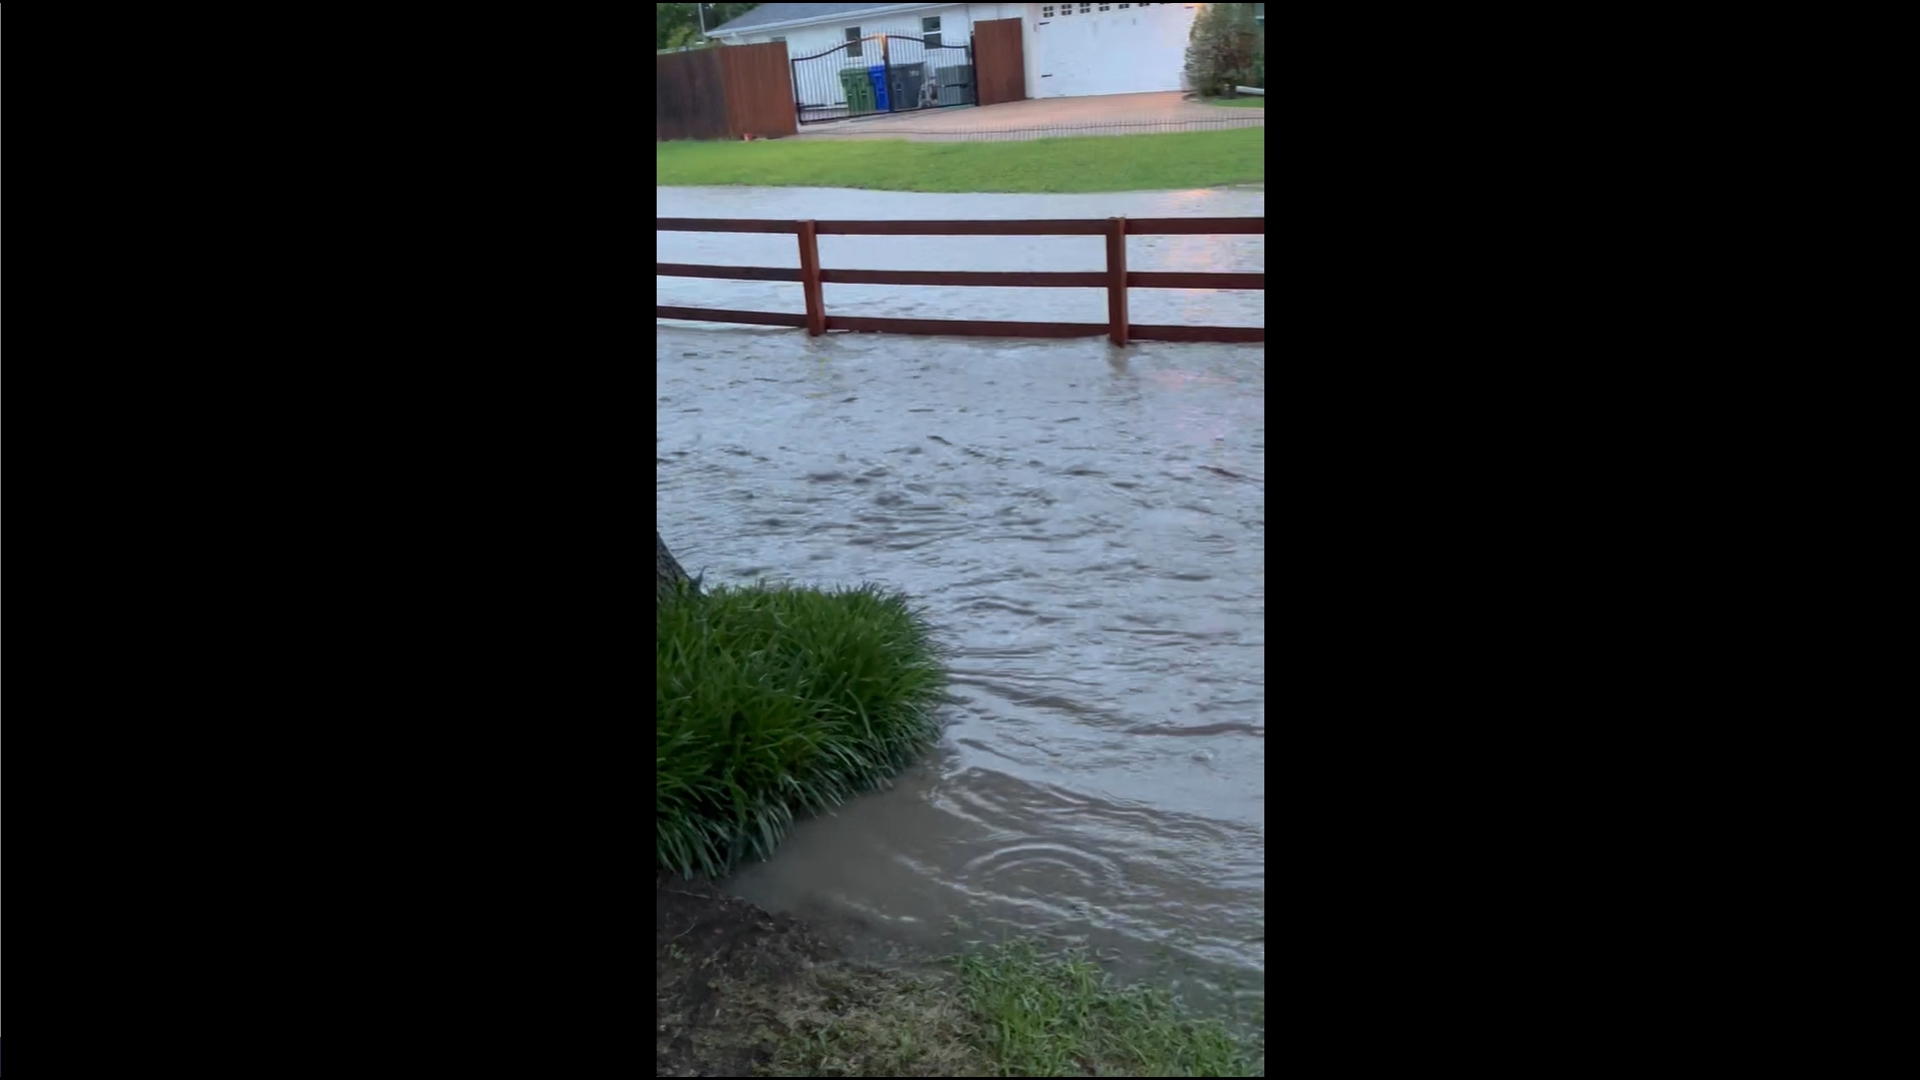 Sent by Frank Valencia & Monique DuQuette, video from neighbor Ken Kearns